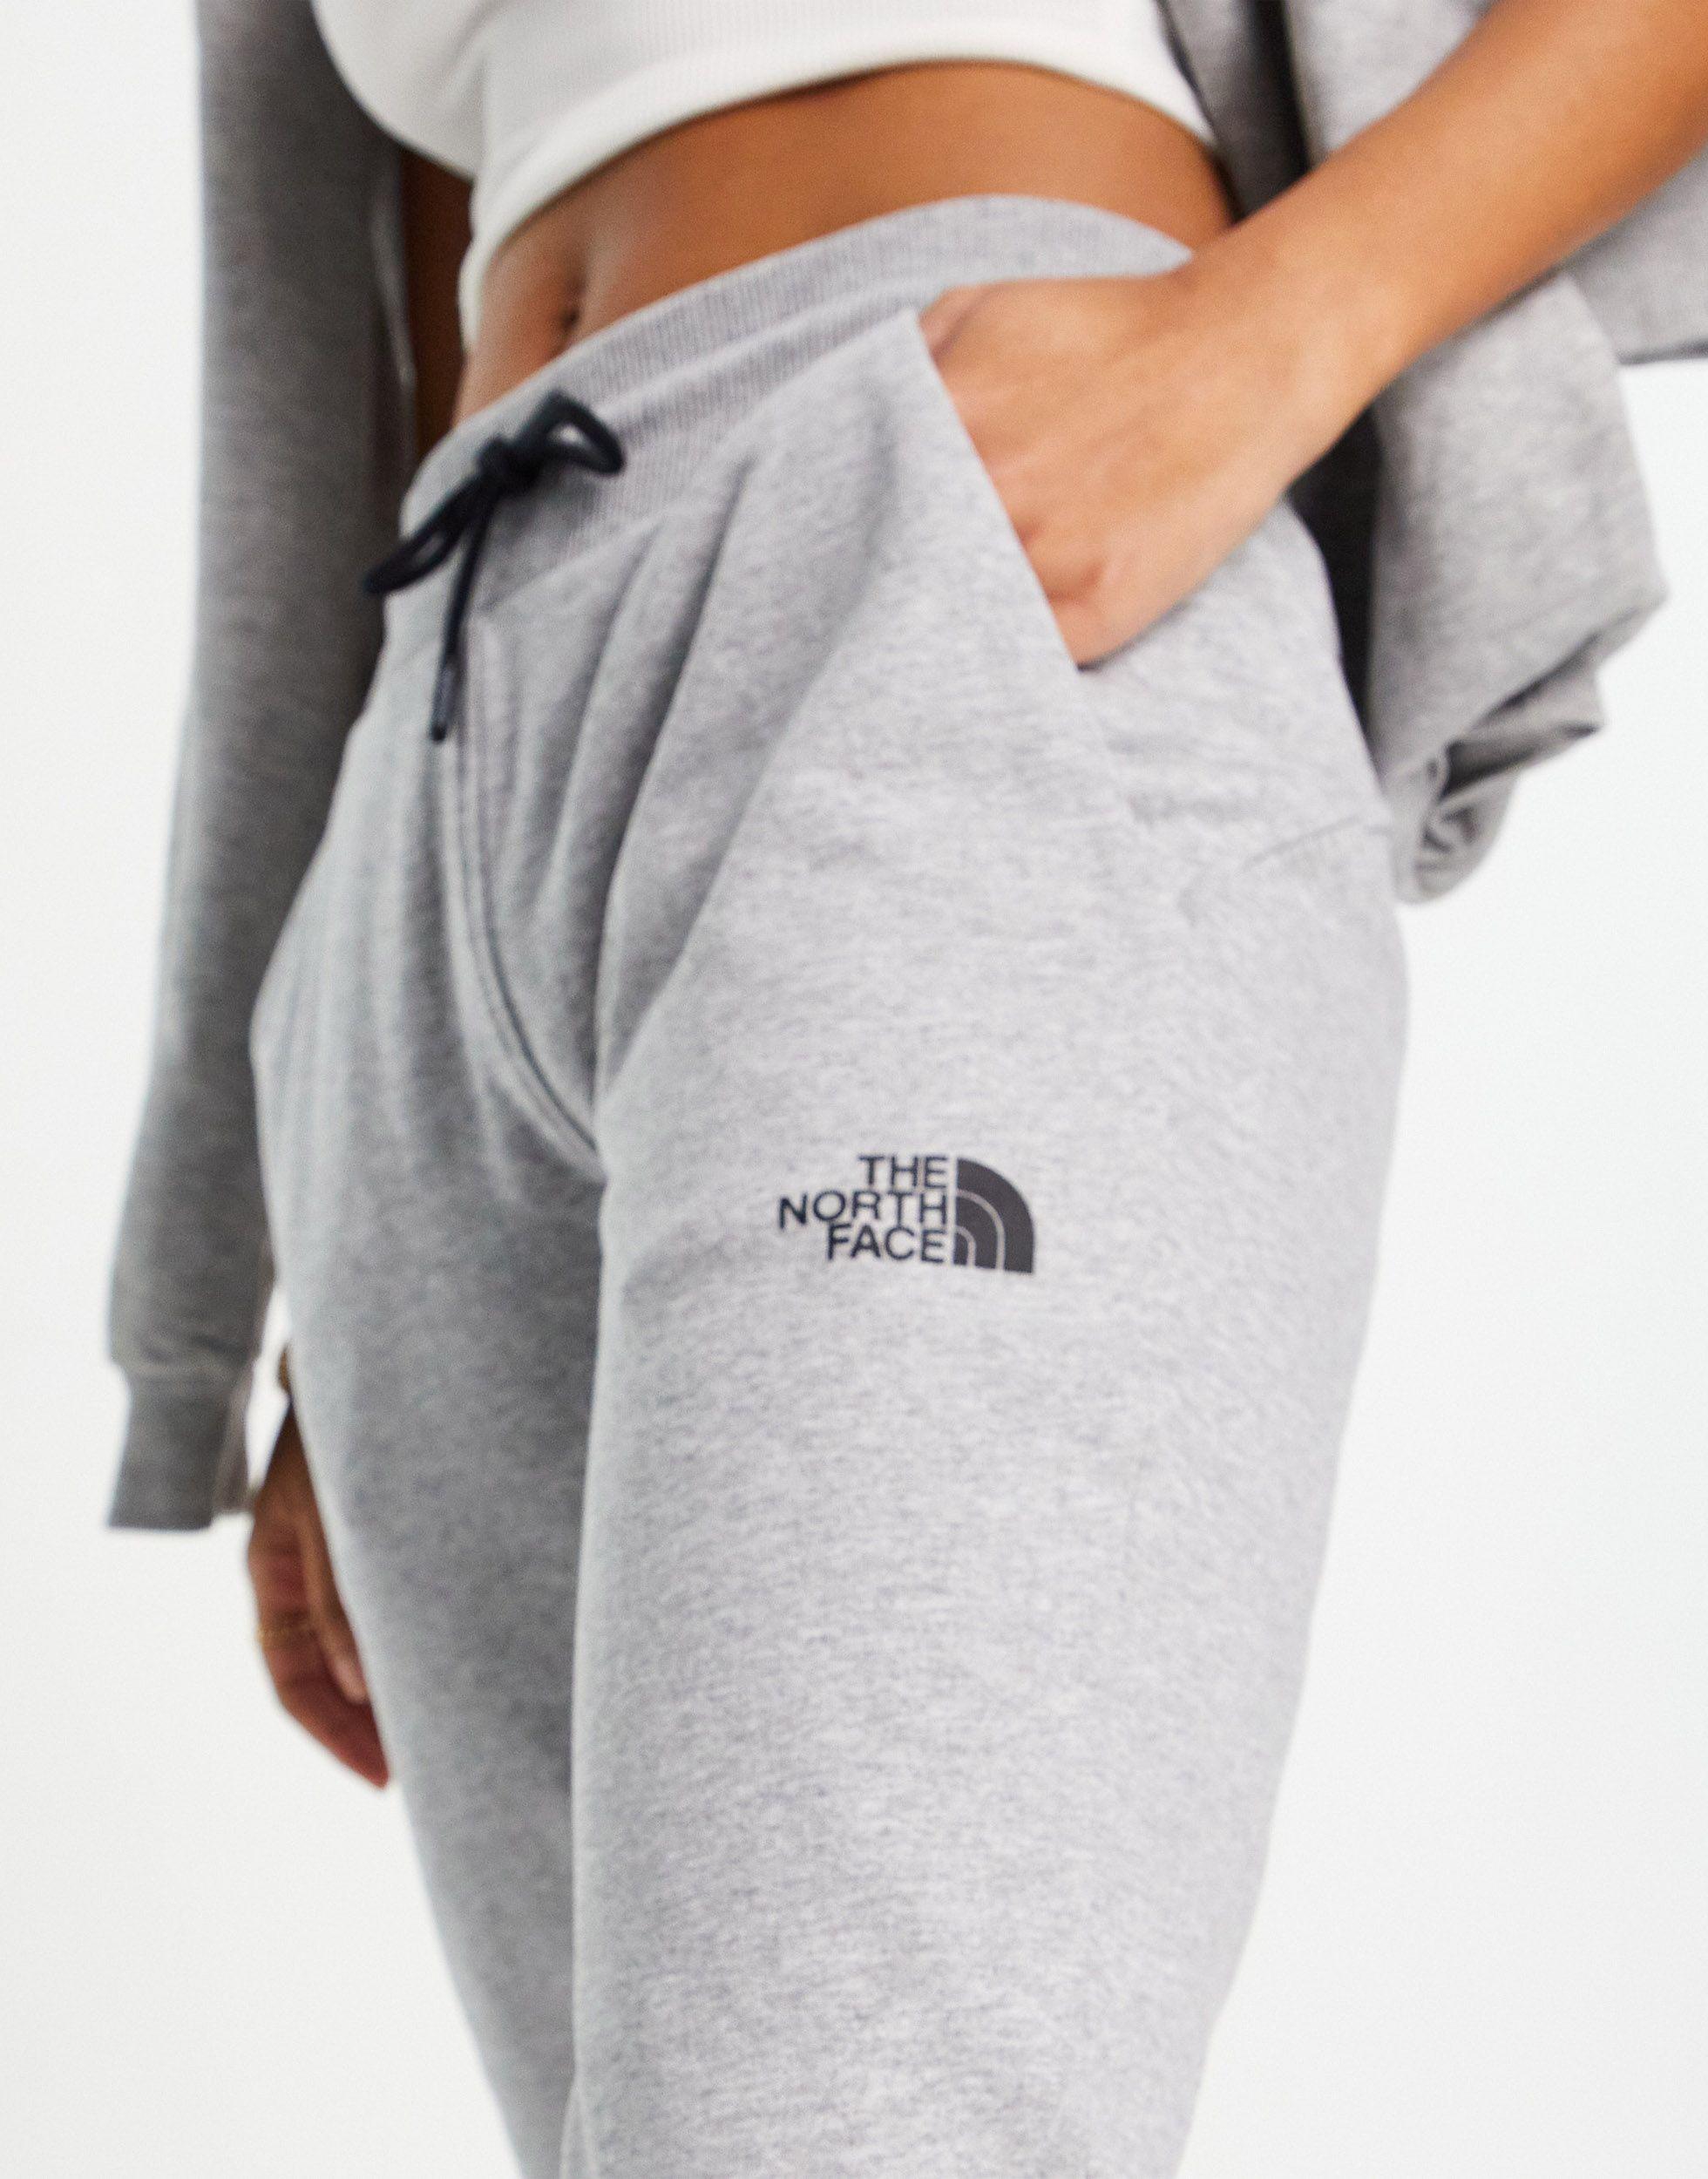 The North Face Tight jogger in Grey